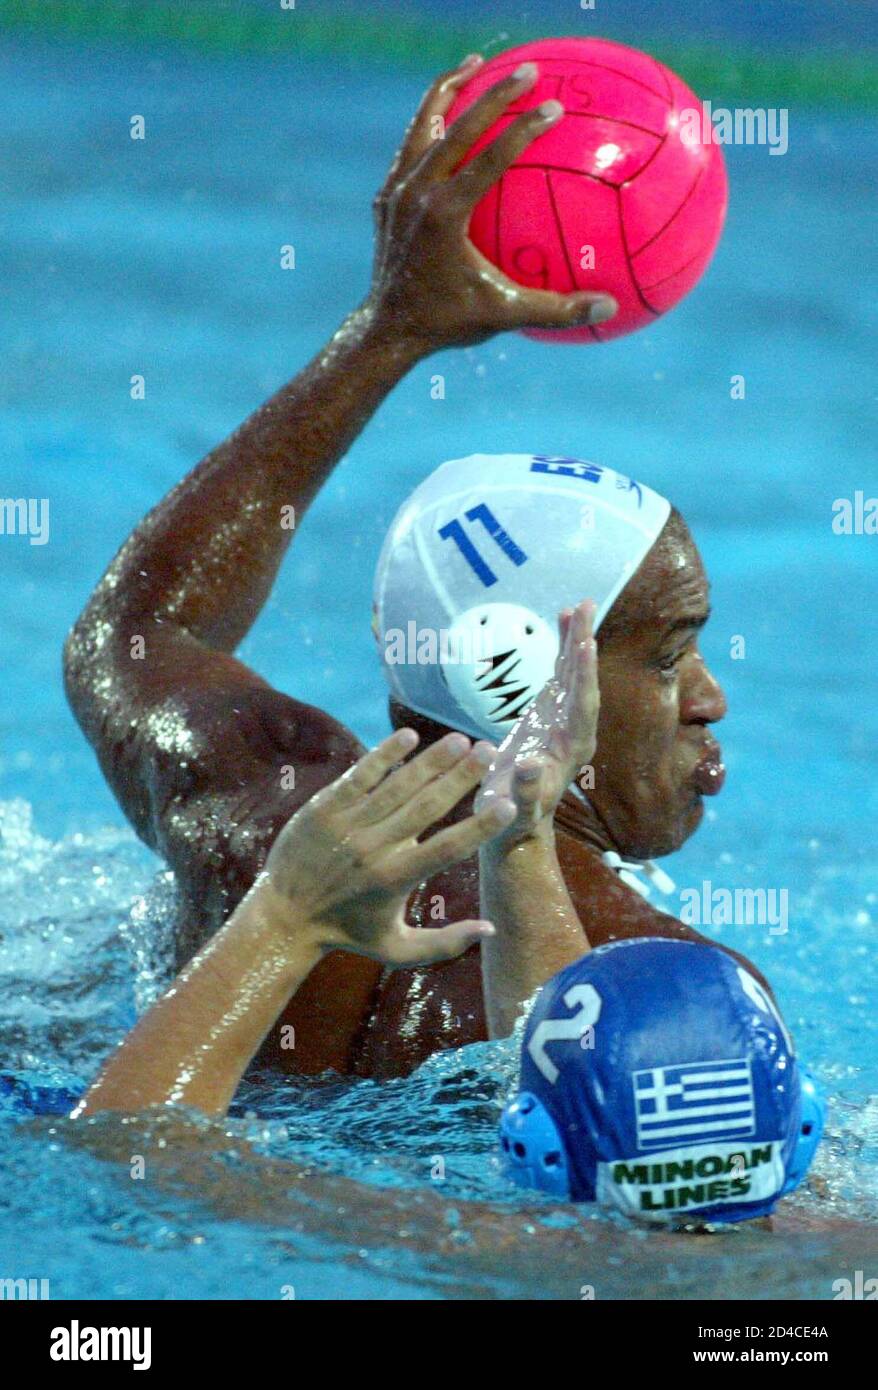 Ivan Perez (11) of Spain fights for the ball with Anastasios Schisaz (2) of  Greece during their European Waterpolo Championship match in Kranj June 7,  2003. REUTERS/Srdjan Zivulovic Stock Photo - Alamy